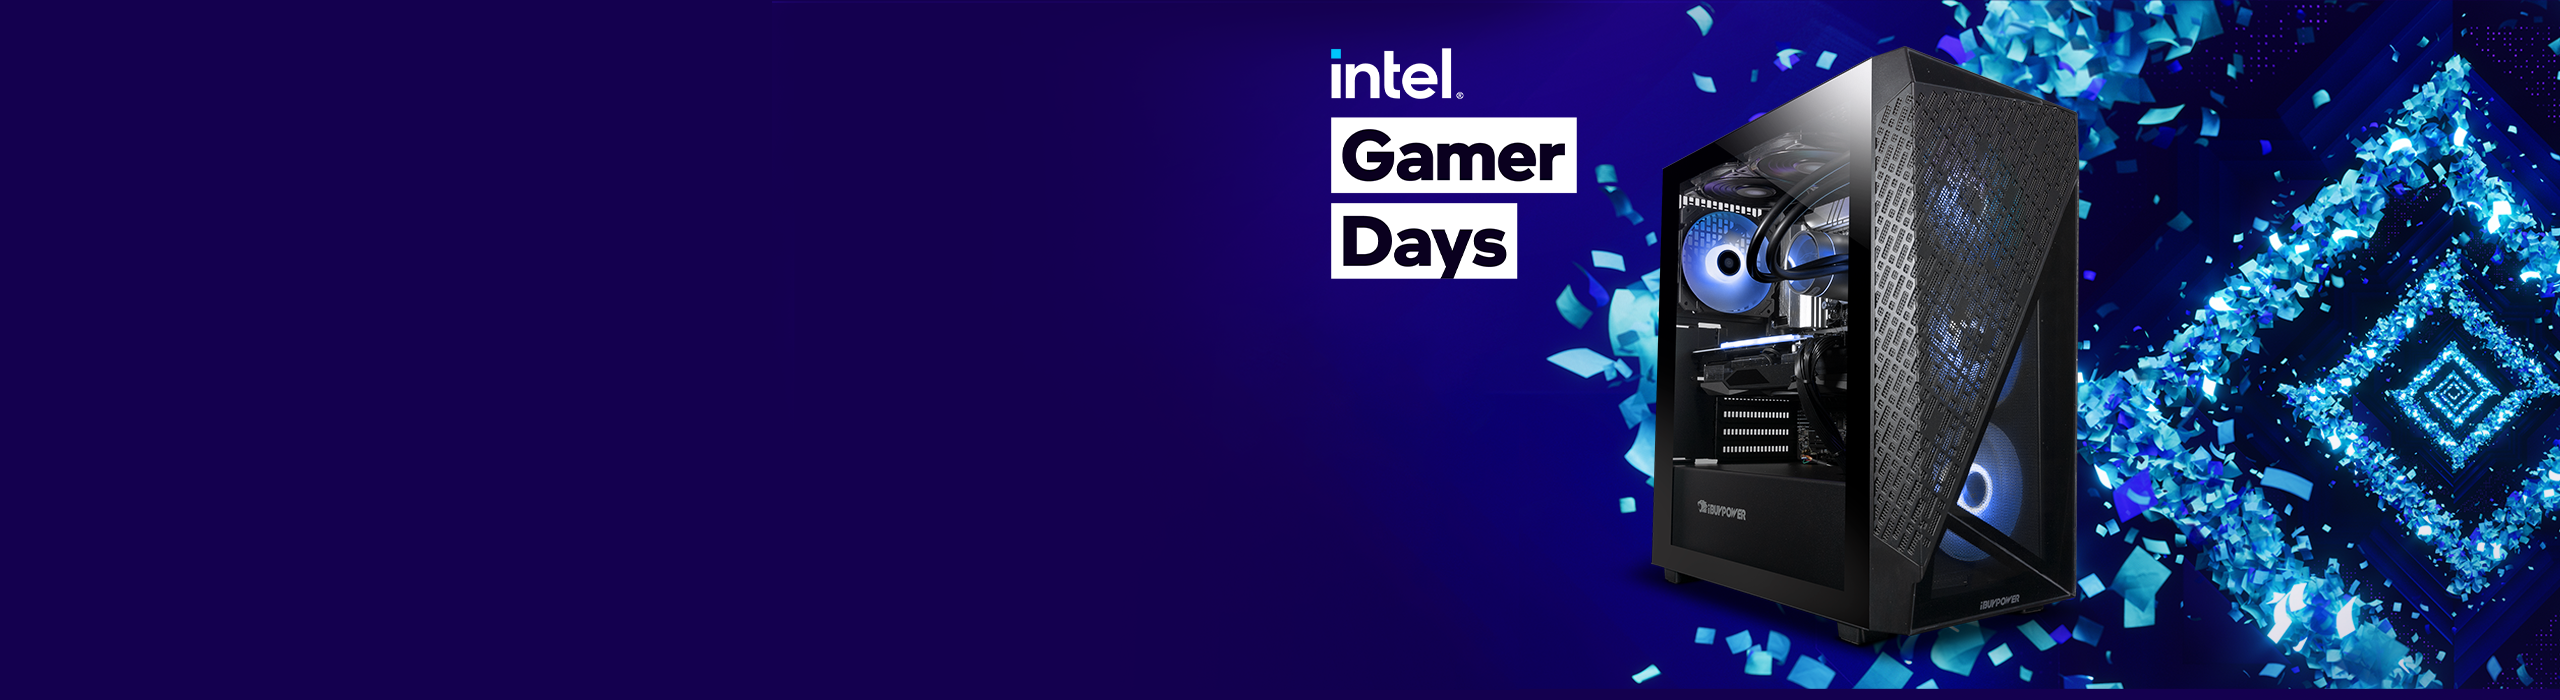 Intel Gamer Day 2022 is Coming